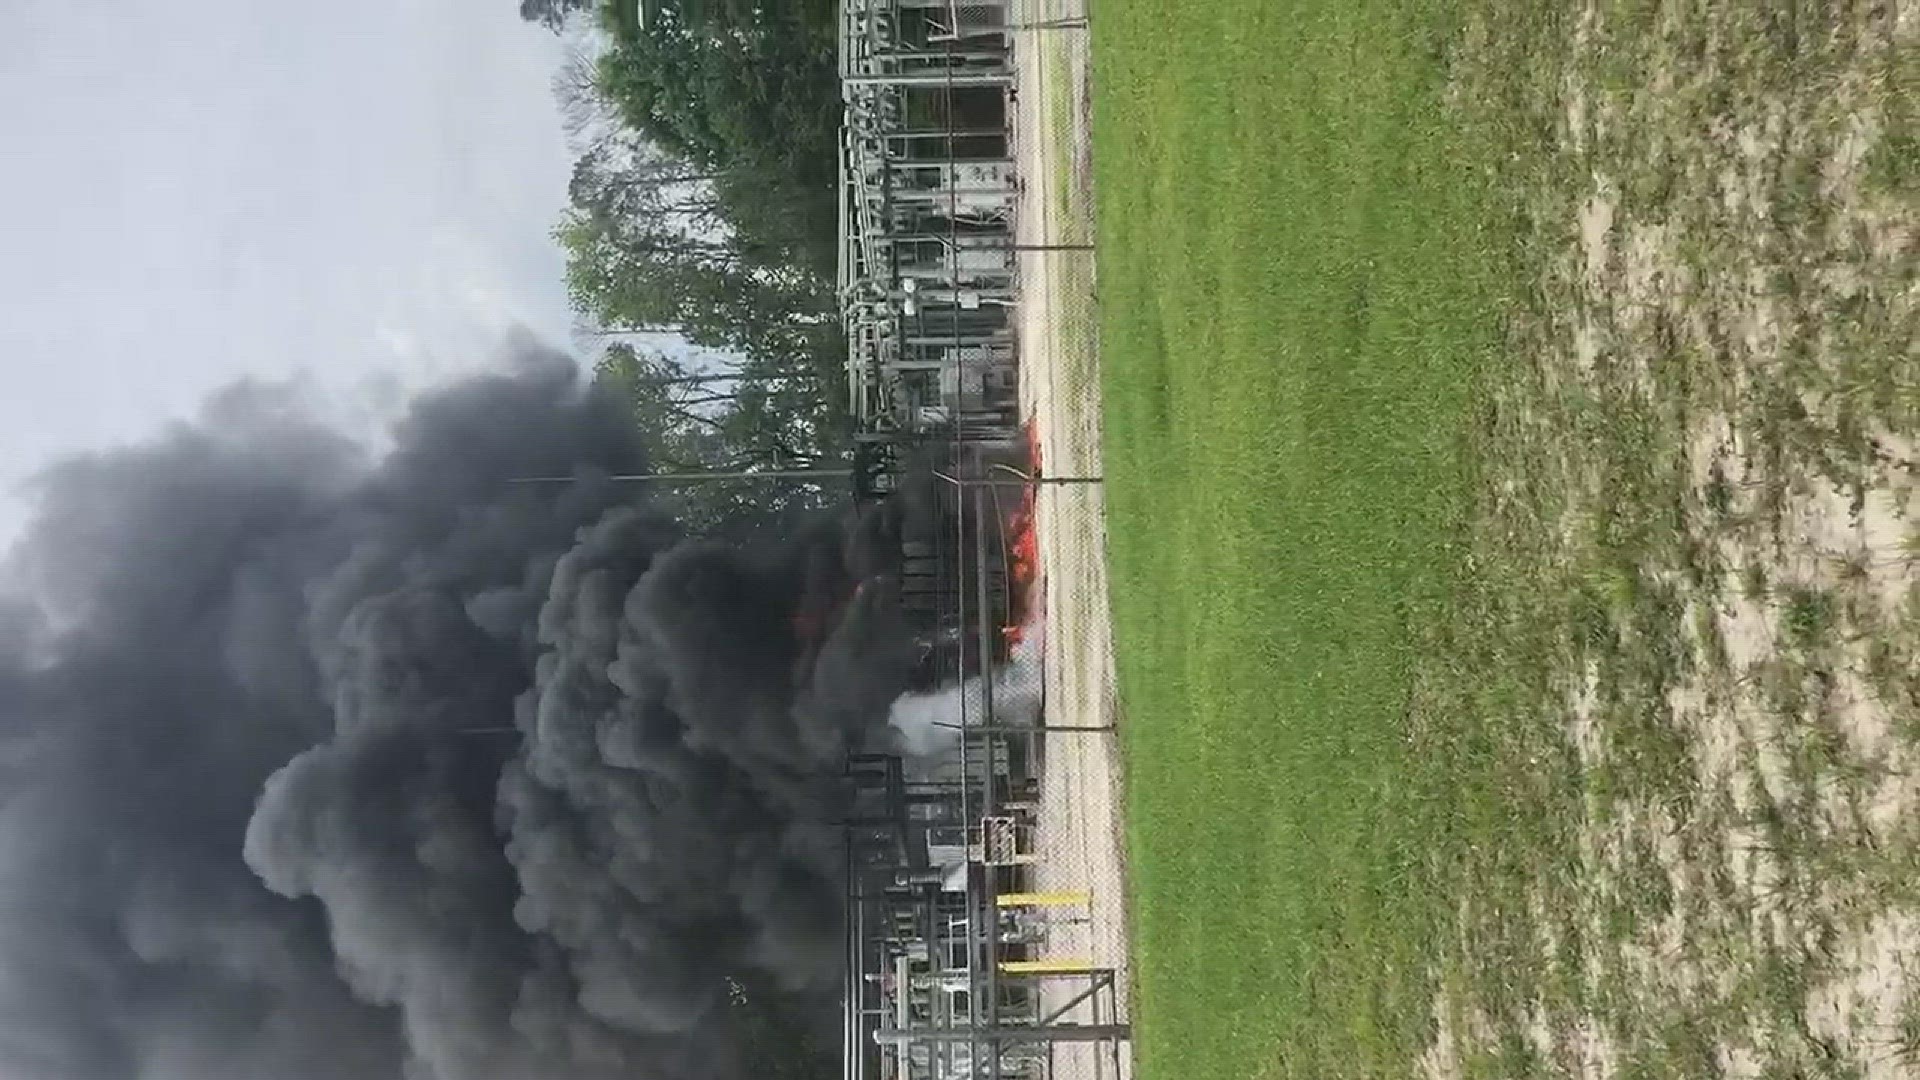 The Orange Park Fire Department provided this footage of a JEA substation fire Saturday.